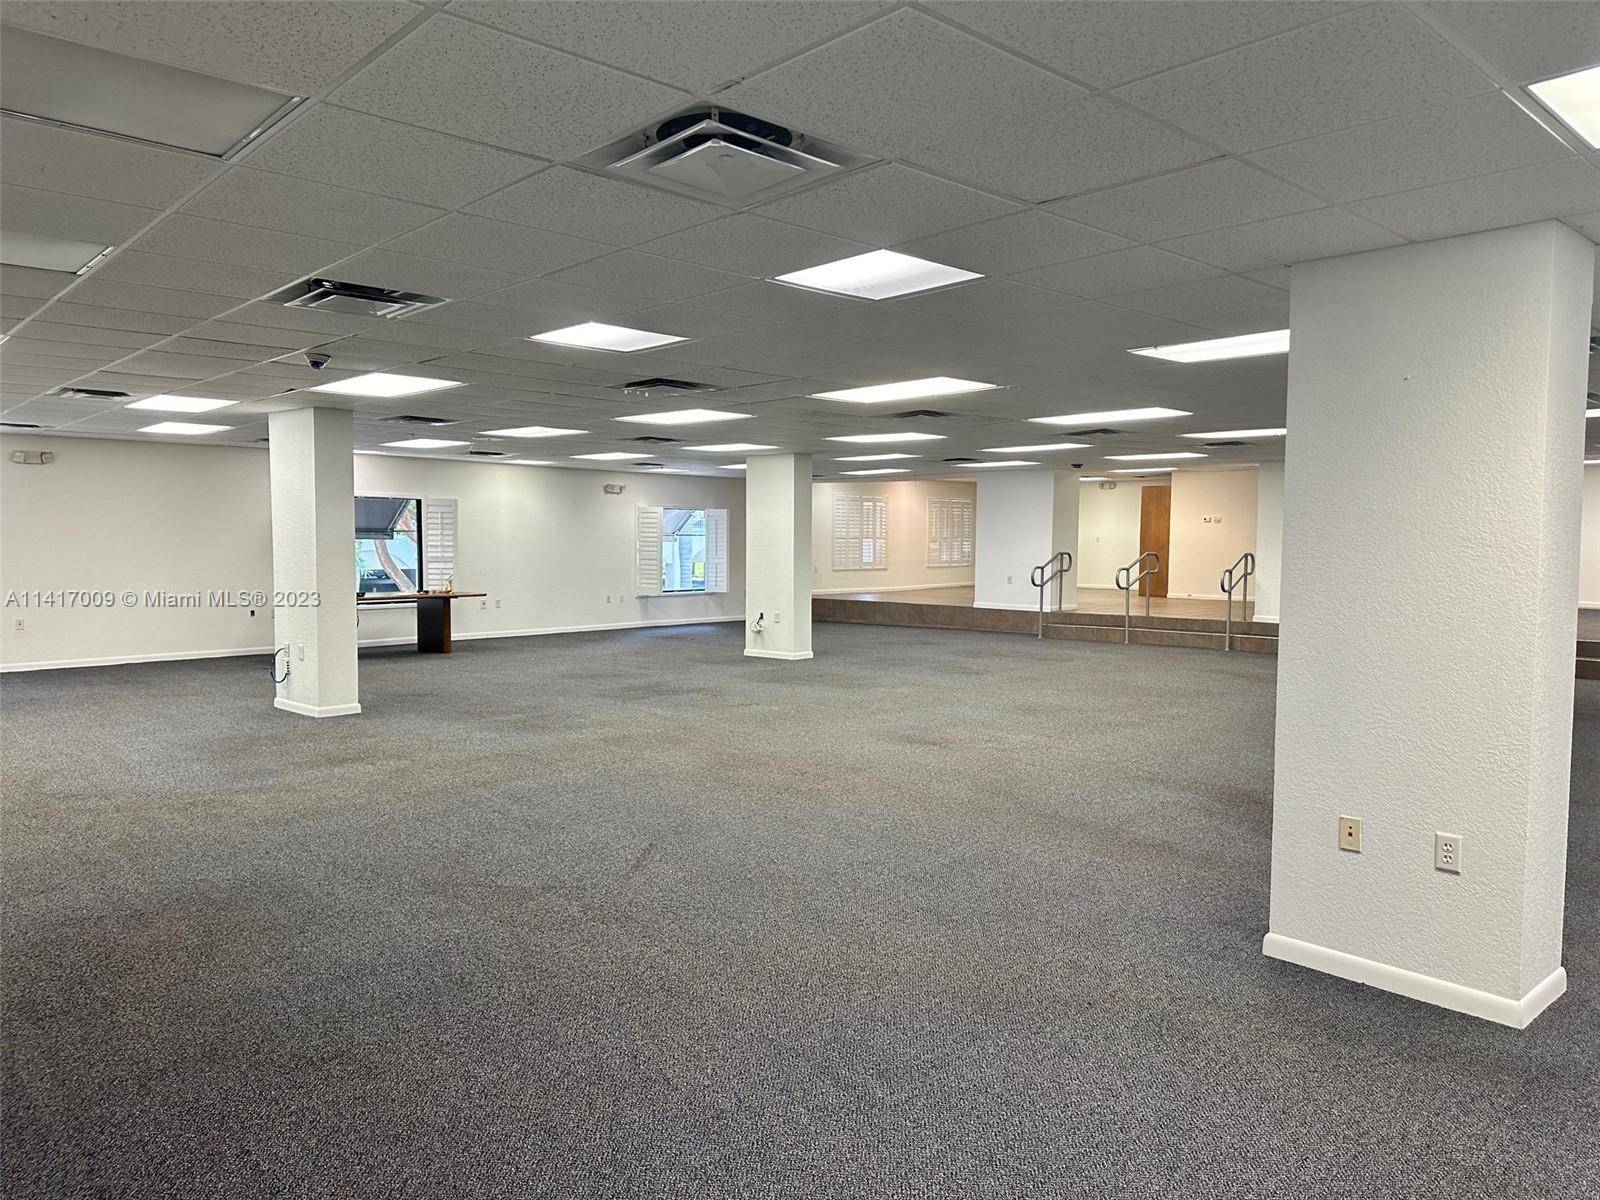 This 5204 sq ft office space is perfect for any business looking for plenty of room to grow.